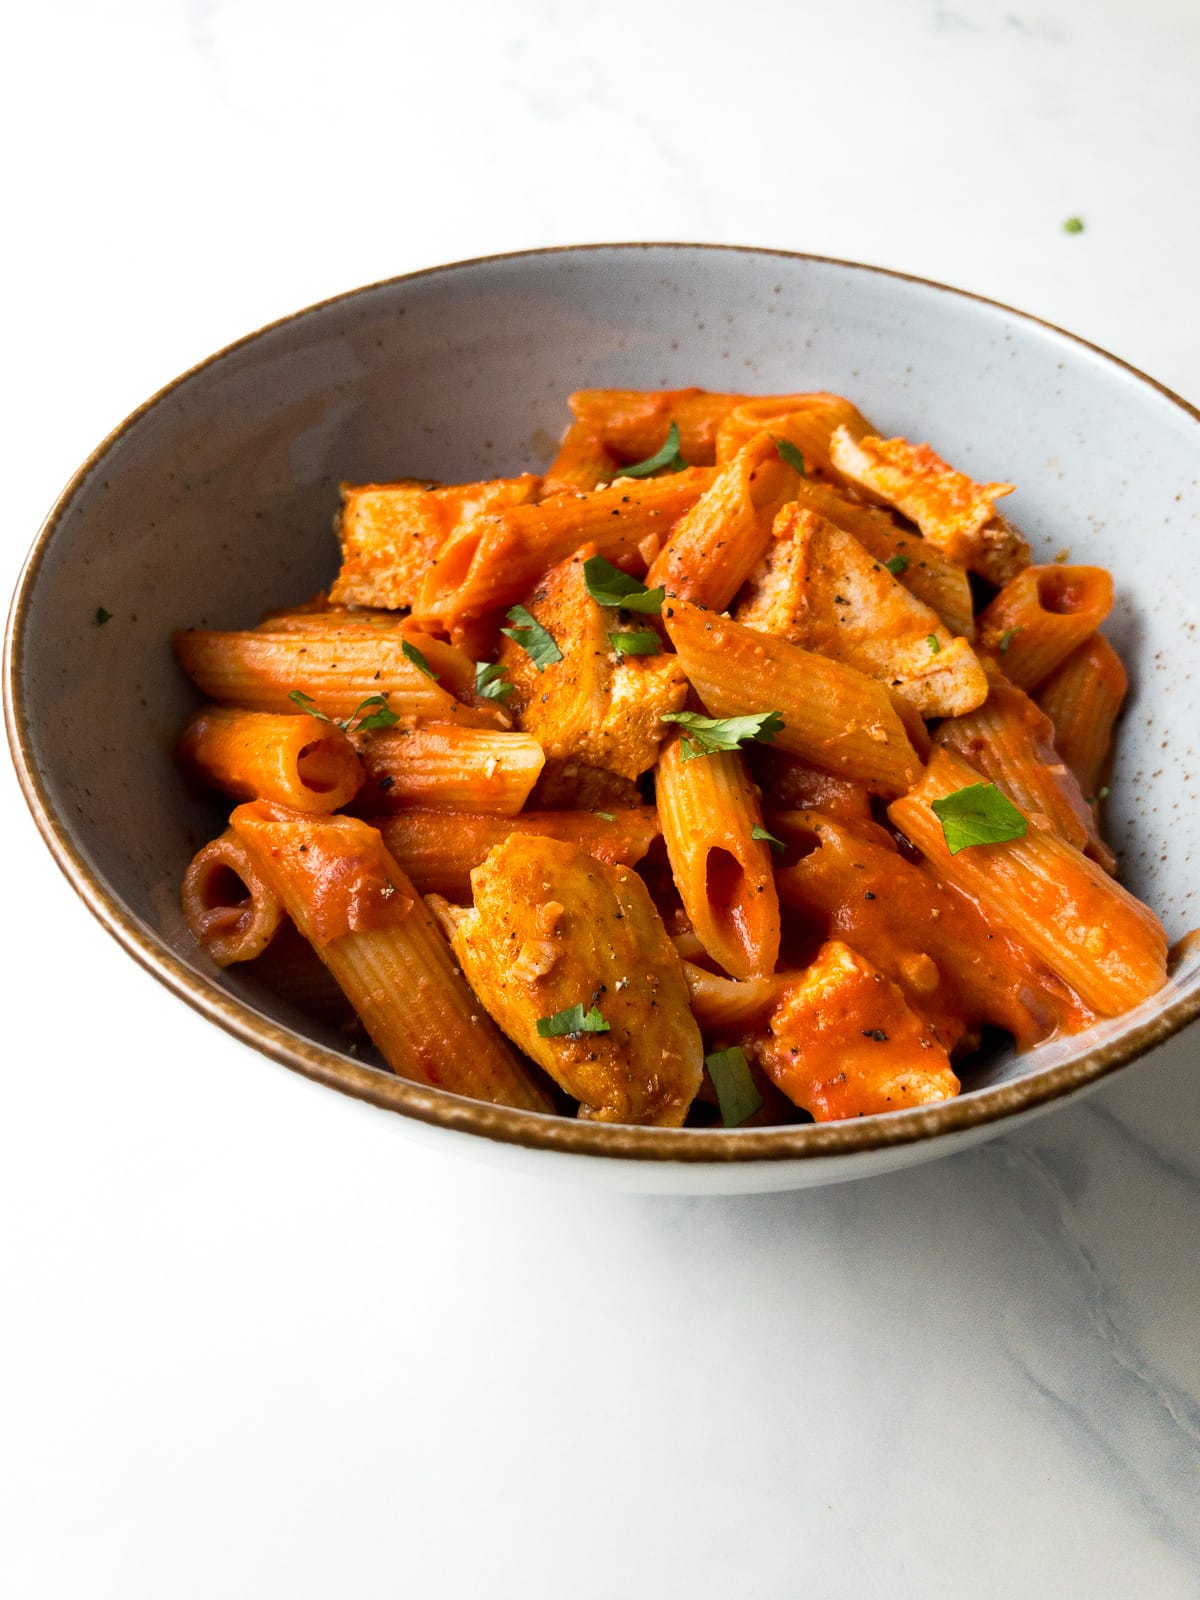 penne alla vodka with chicken in a bowl